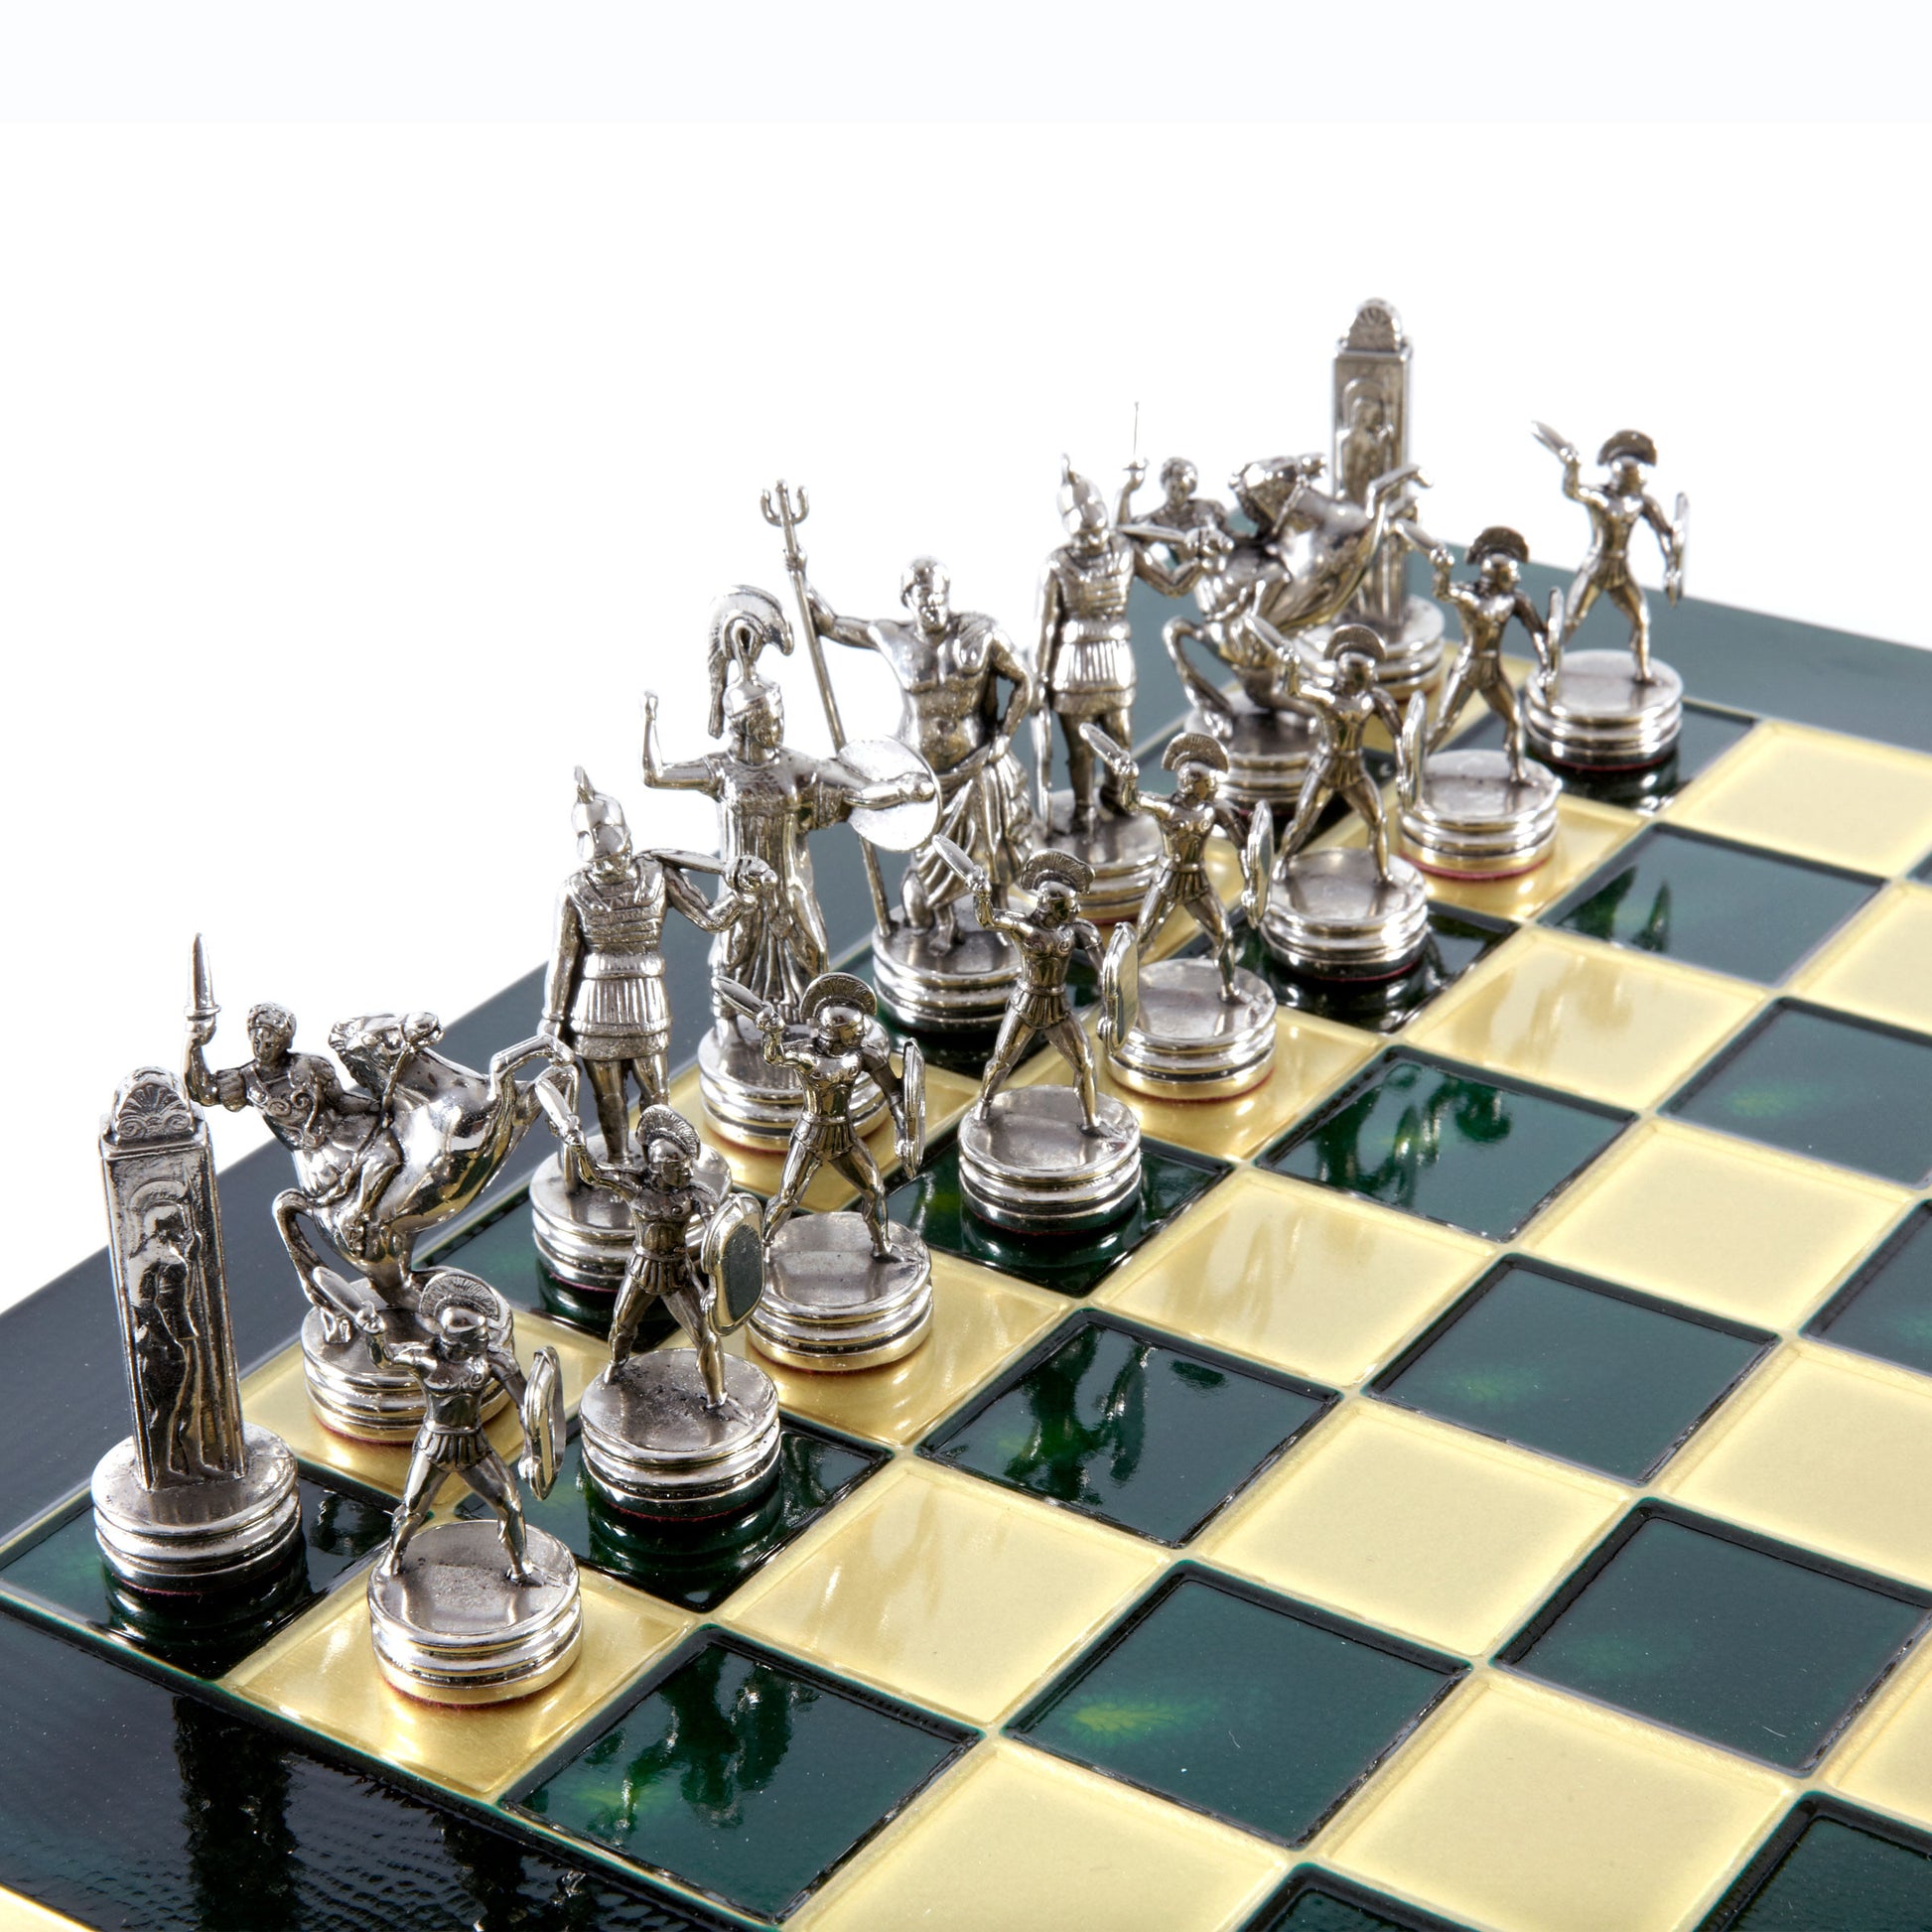 GREEK MYTHOLOGY CHESS SET with gold/silver chessmen and bronze chessboard 36 x 36cm (Medium) - Premium Chess from MANOPOULOS Chess & Backgammon - Just €210! Shop now at MANOPOULOS Chess & Backgammon